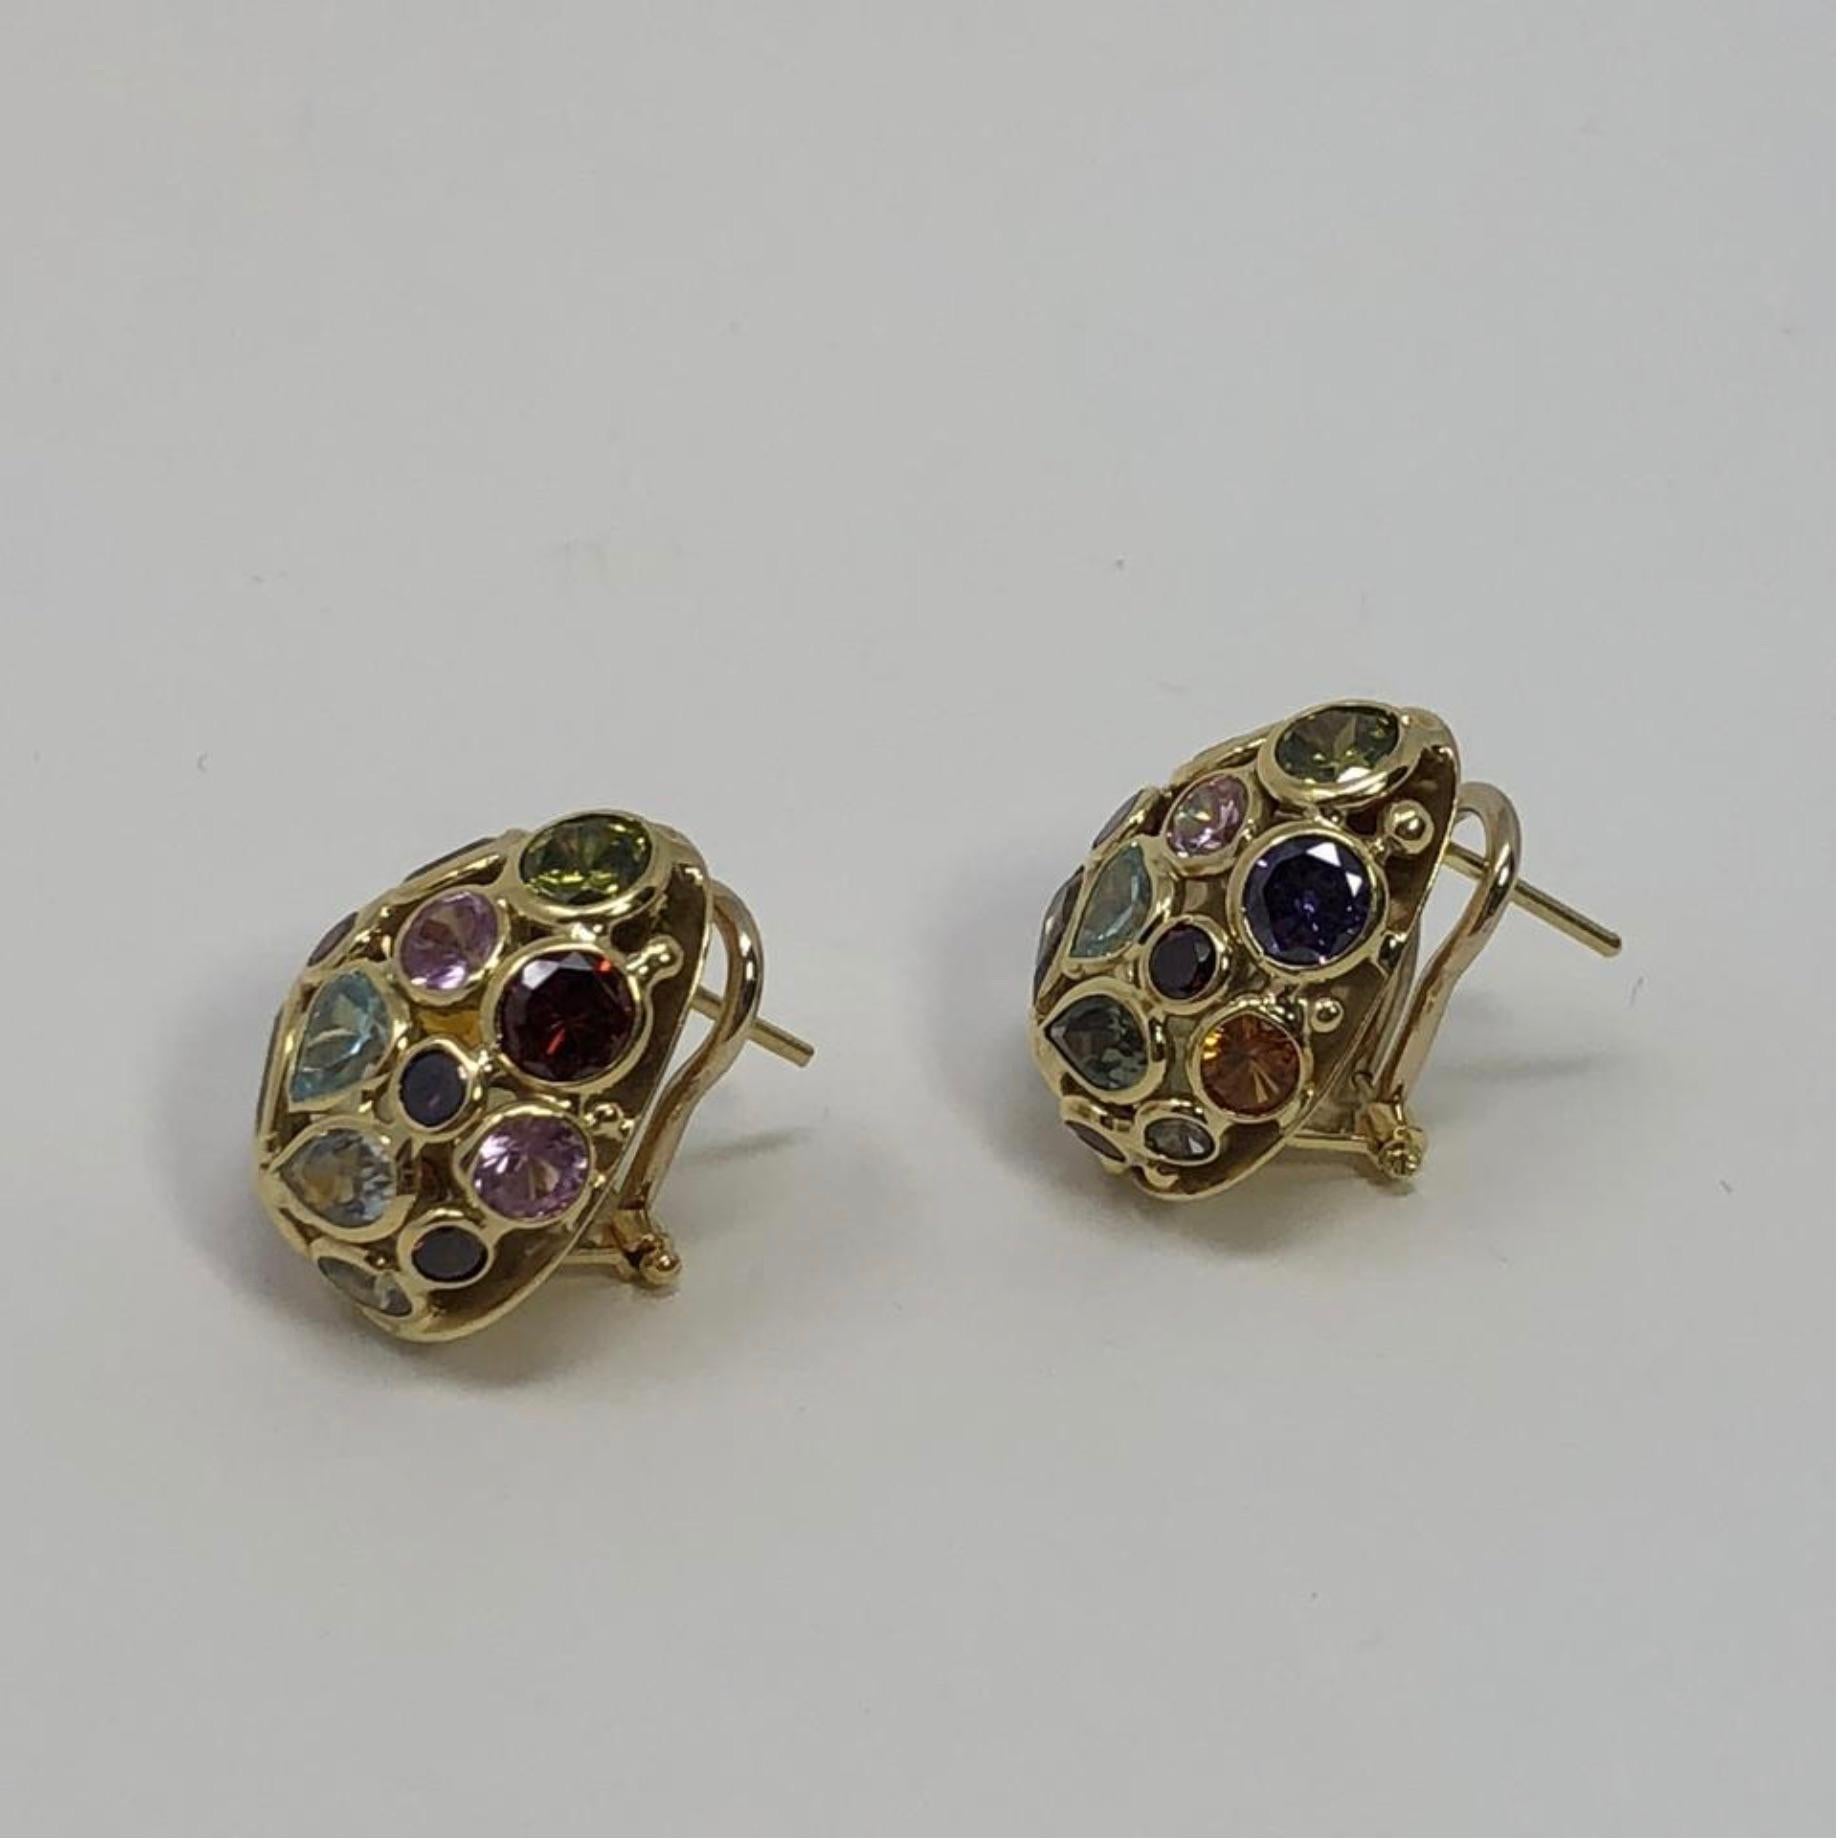 MODEL - 18k Yellow Gold Clip on Earrings with Precious Stones 

CONDITION - Exceptional! No signs of wear.

SKU - 2204-FL

ORIGINAL RETAIL PRICE - $2,750 + tax

MATERIAL - 18k Gold and Semi-Precious Stones

WEIGHT - 9.6 grams

DIMENSIONS - L.6 x H.8